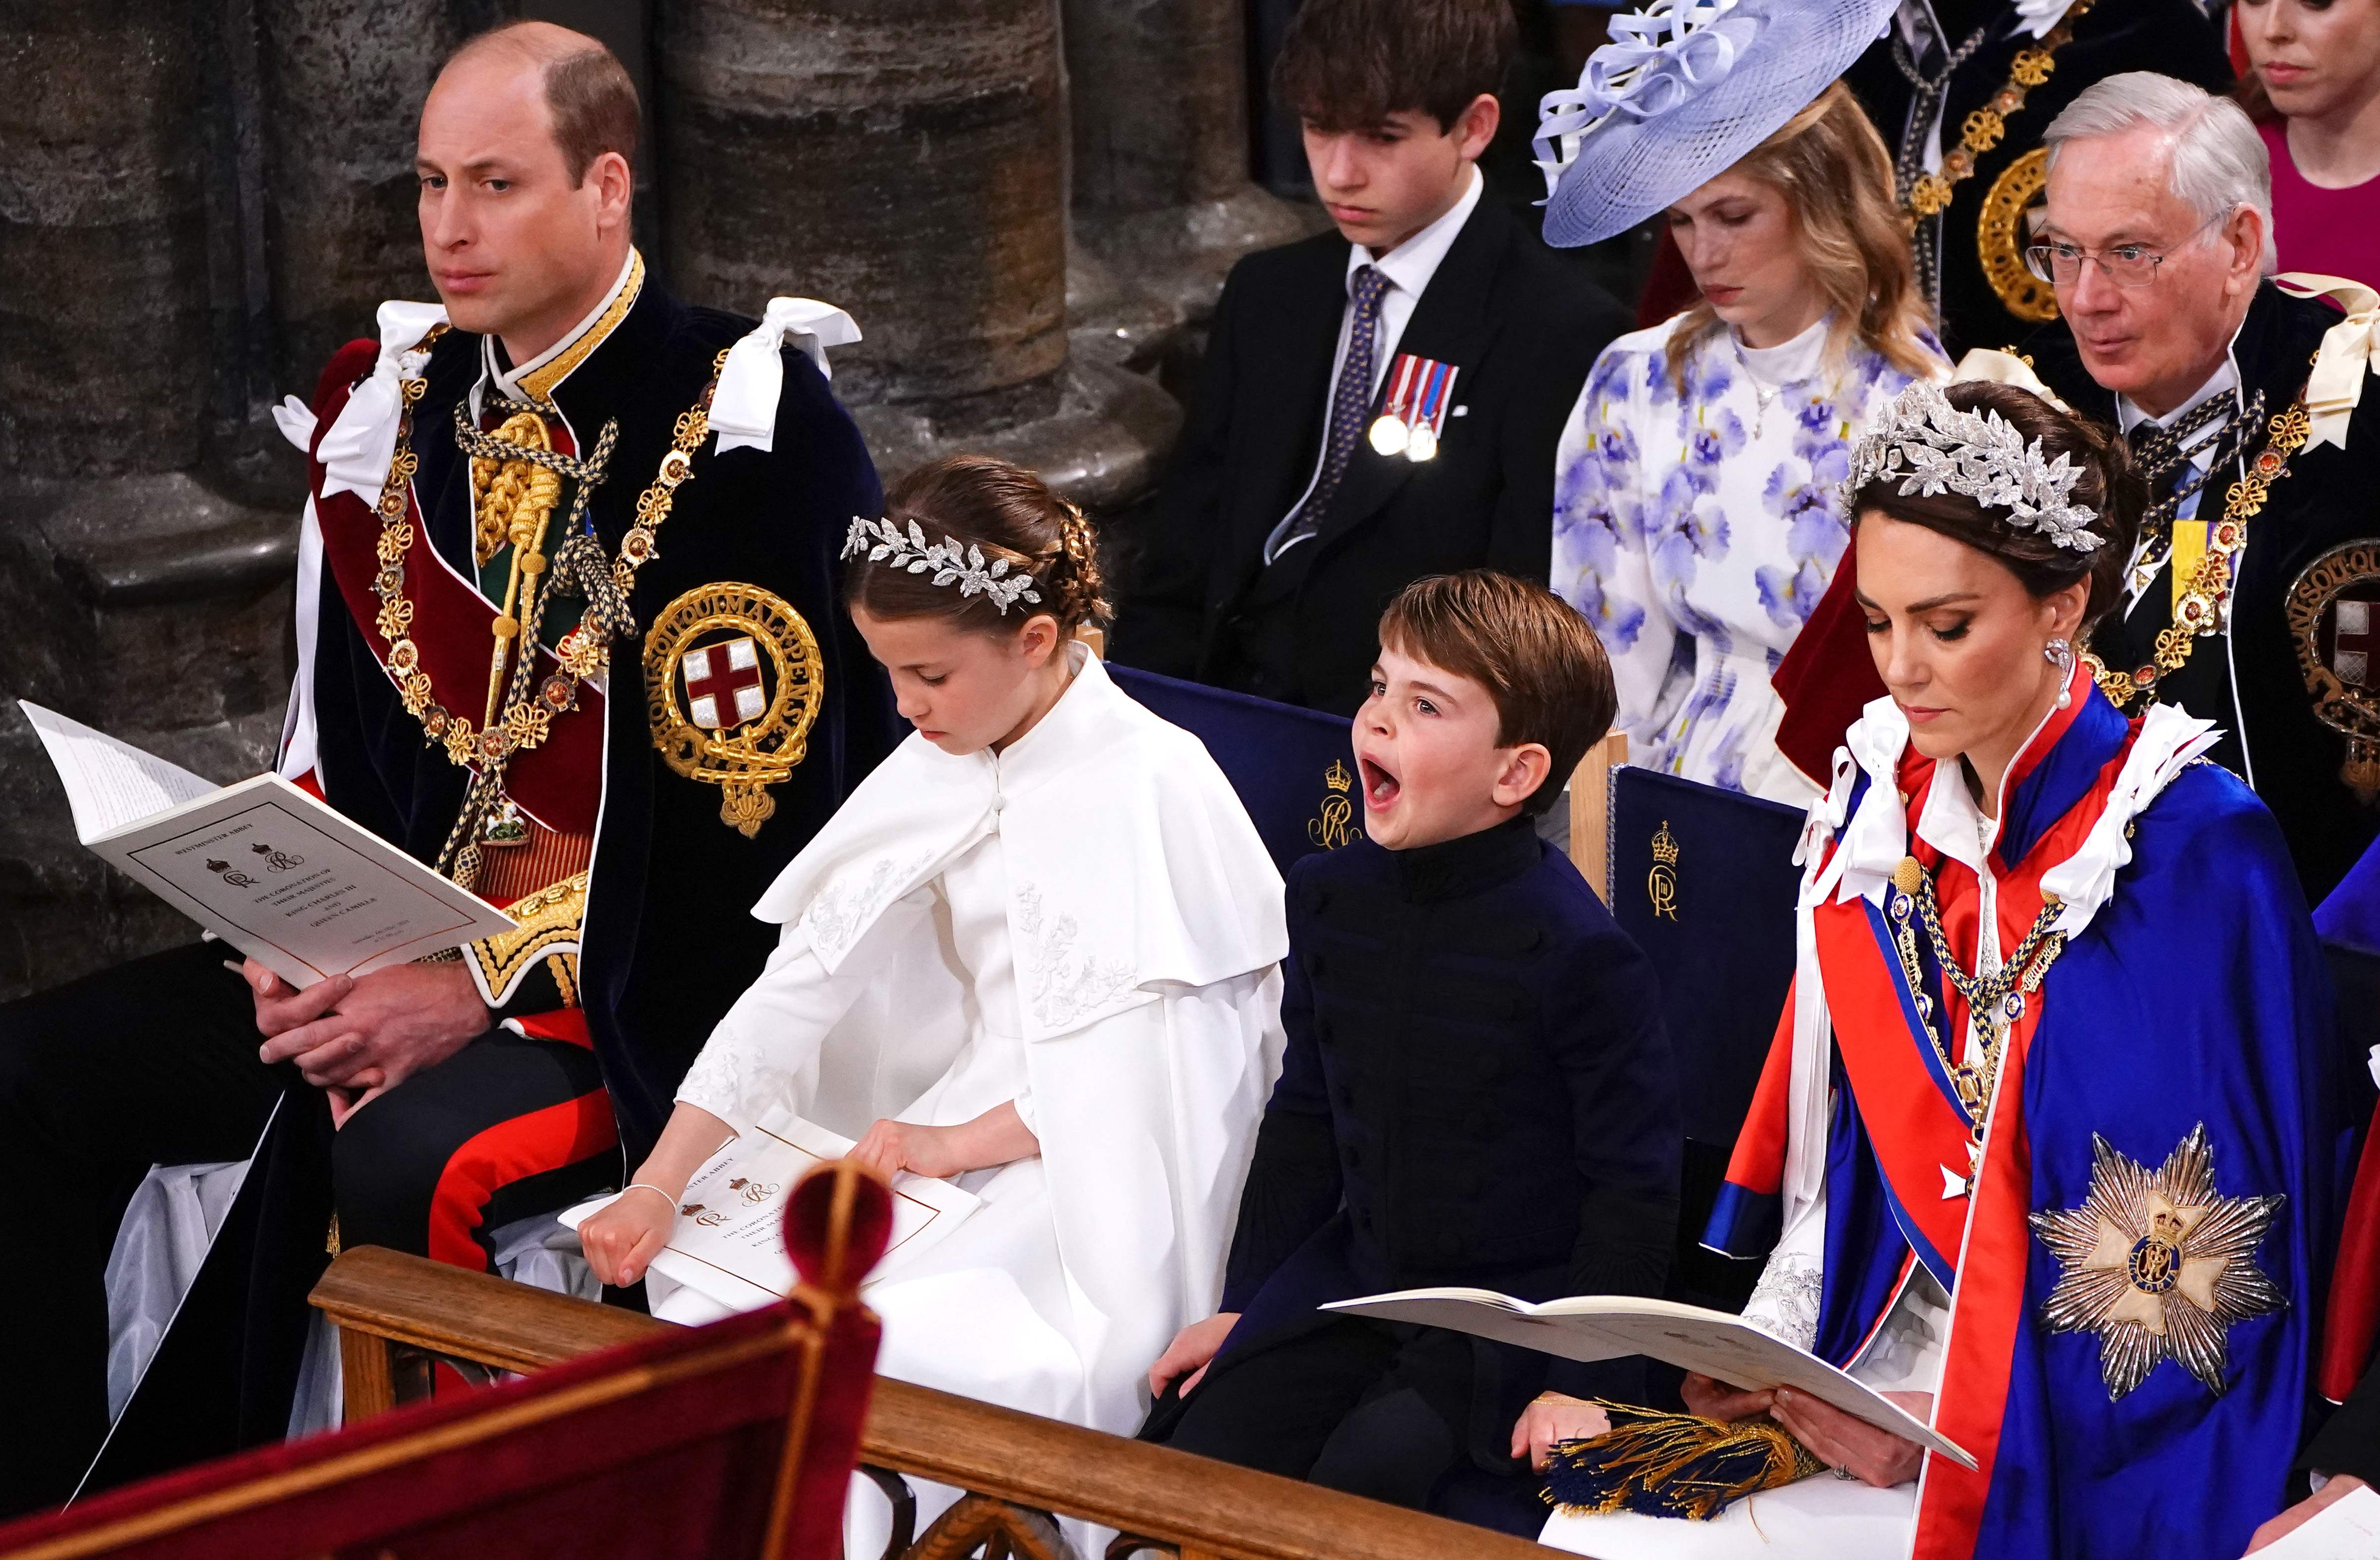 Prince Louis, grandson of King Charles, yawns during the coronation ceremony